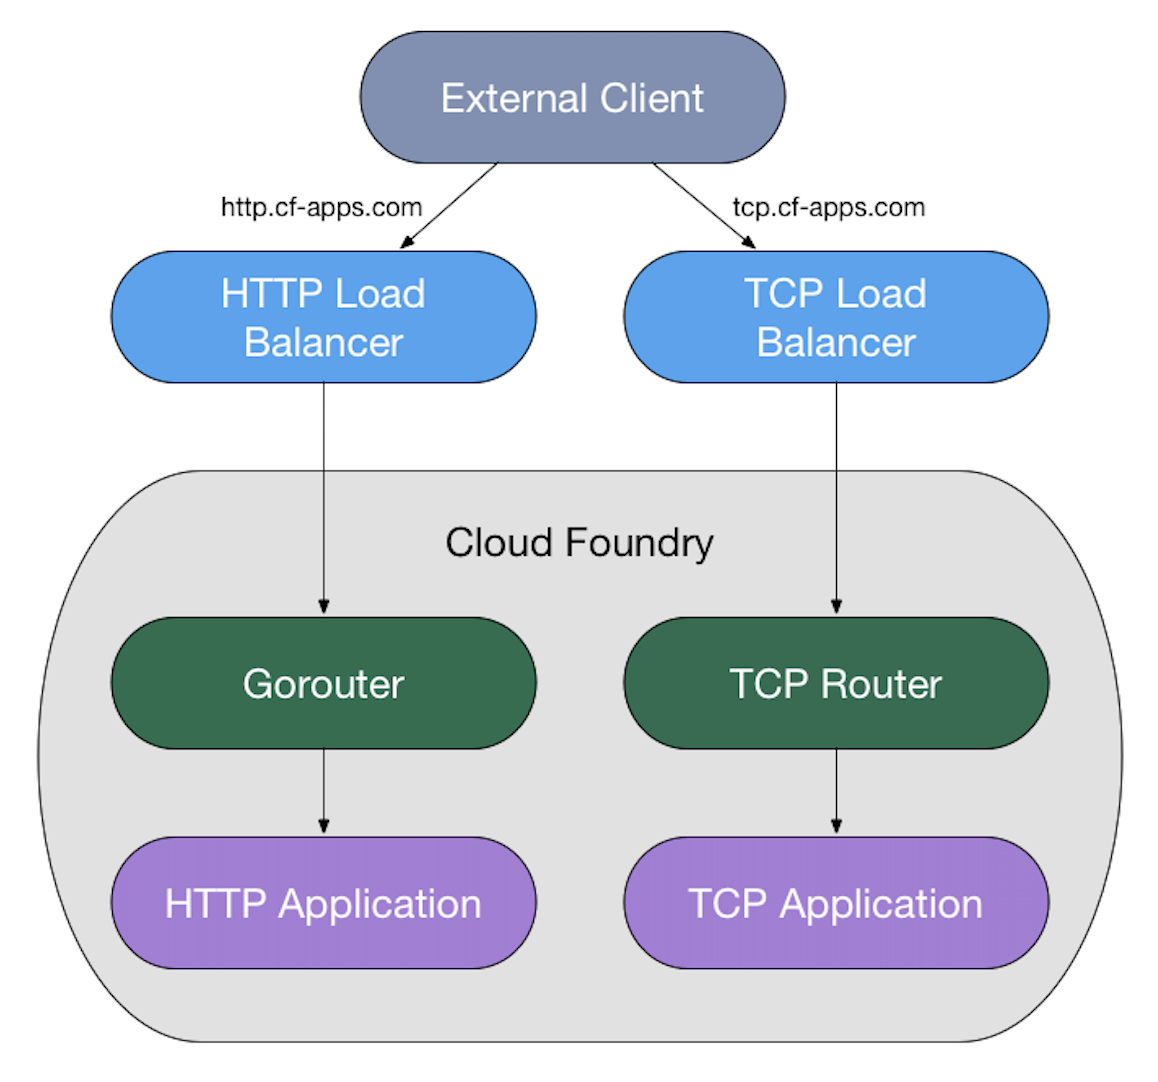 alt-text="External client request flow. The External Client sends out two data flows, one to the HTTP Load Balancer (http.cf-apps.com) and one to the TCP Load Balancer (tcp.cf-apps.com). HTTP Load Balancer sends data through Gorouter to the HTTP Application. TCP Load Balancer sends data through TCP Router to the TCP Application. Gorouter, TCP Router, HTTP Application, and TCP Application are co-located in in a box labelled Cloud Foundry."